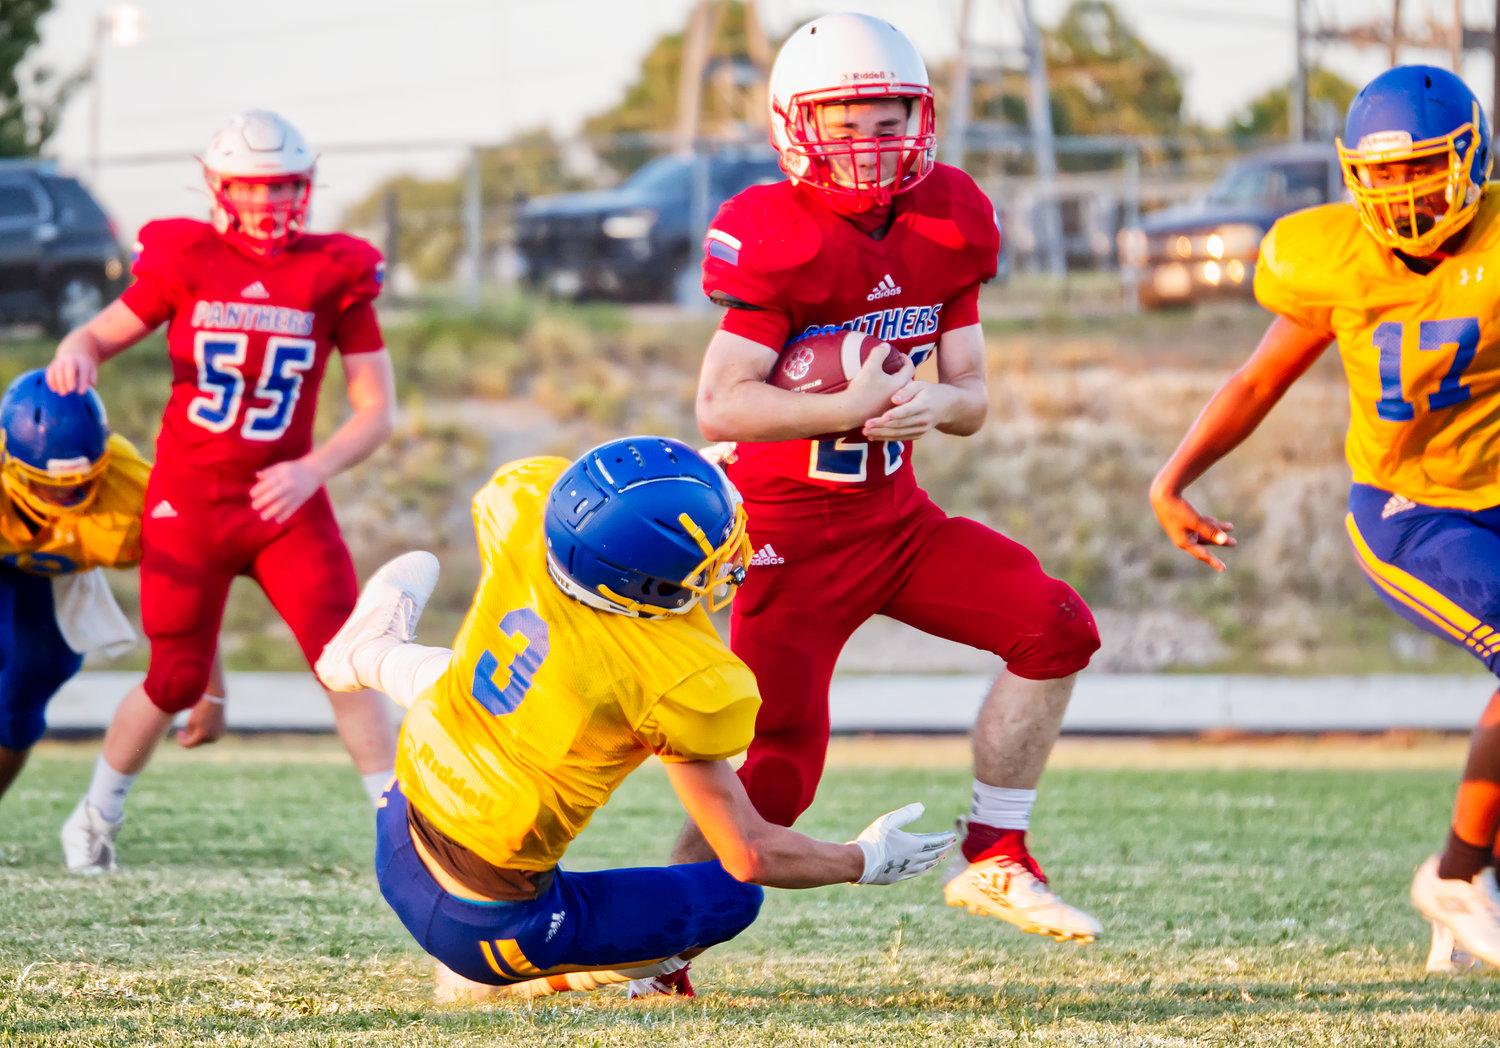 Alba-Golden battled with Carlisle last Thursday in the high school football season’s only scrimmage. The Panthers will open the season Friday night at Prairiland. (Monitor photo by Sam Major)